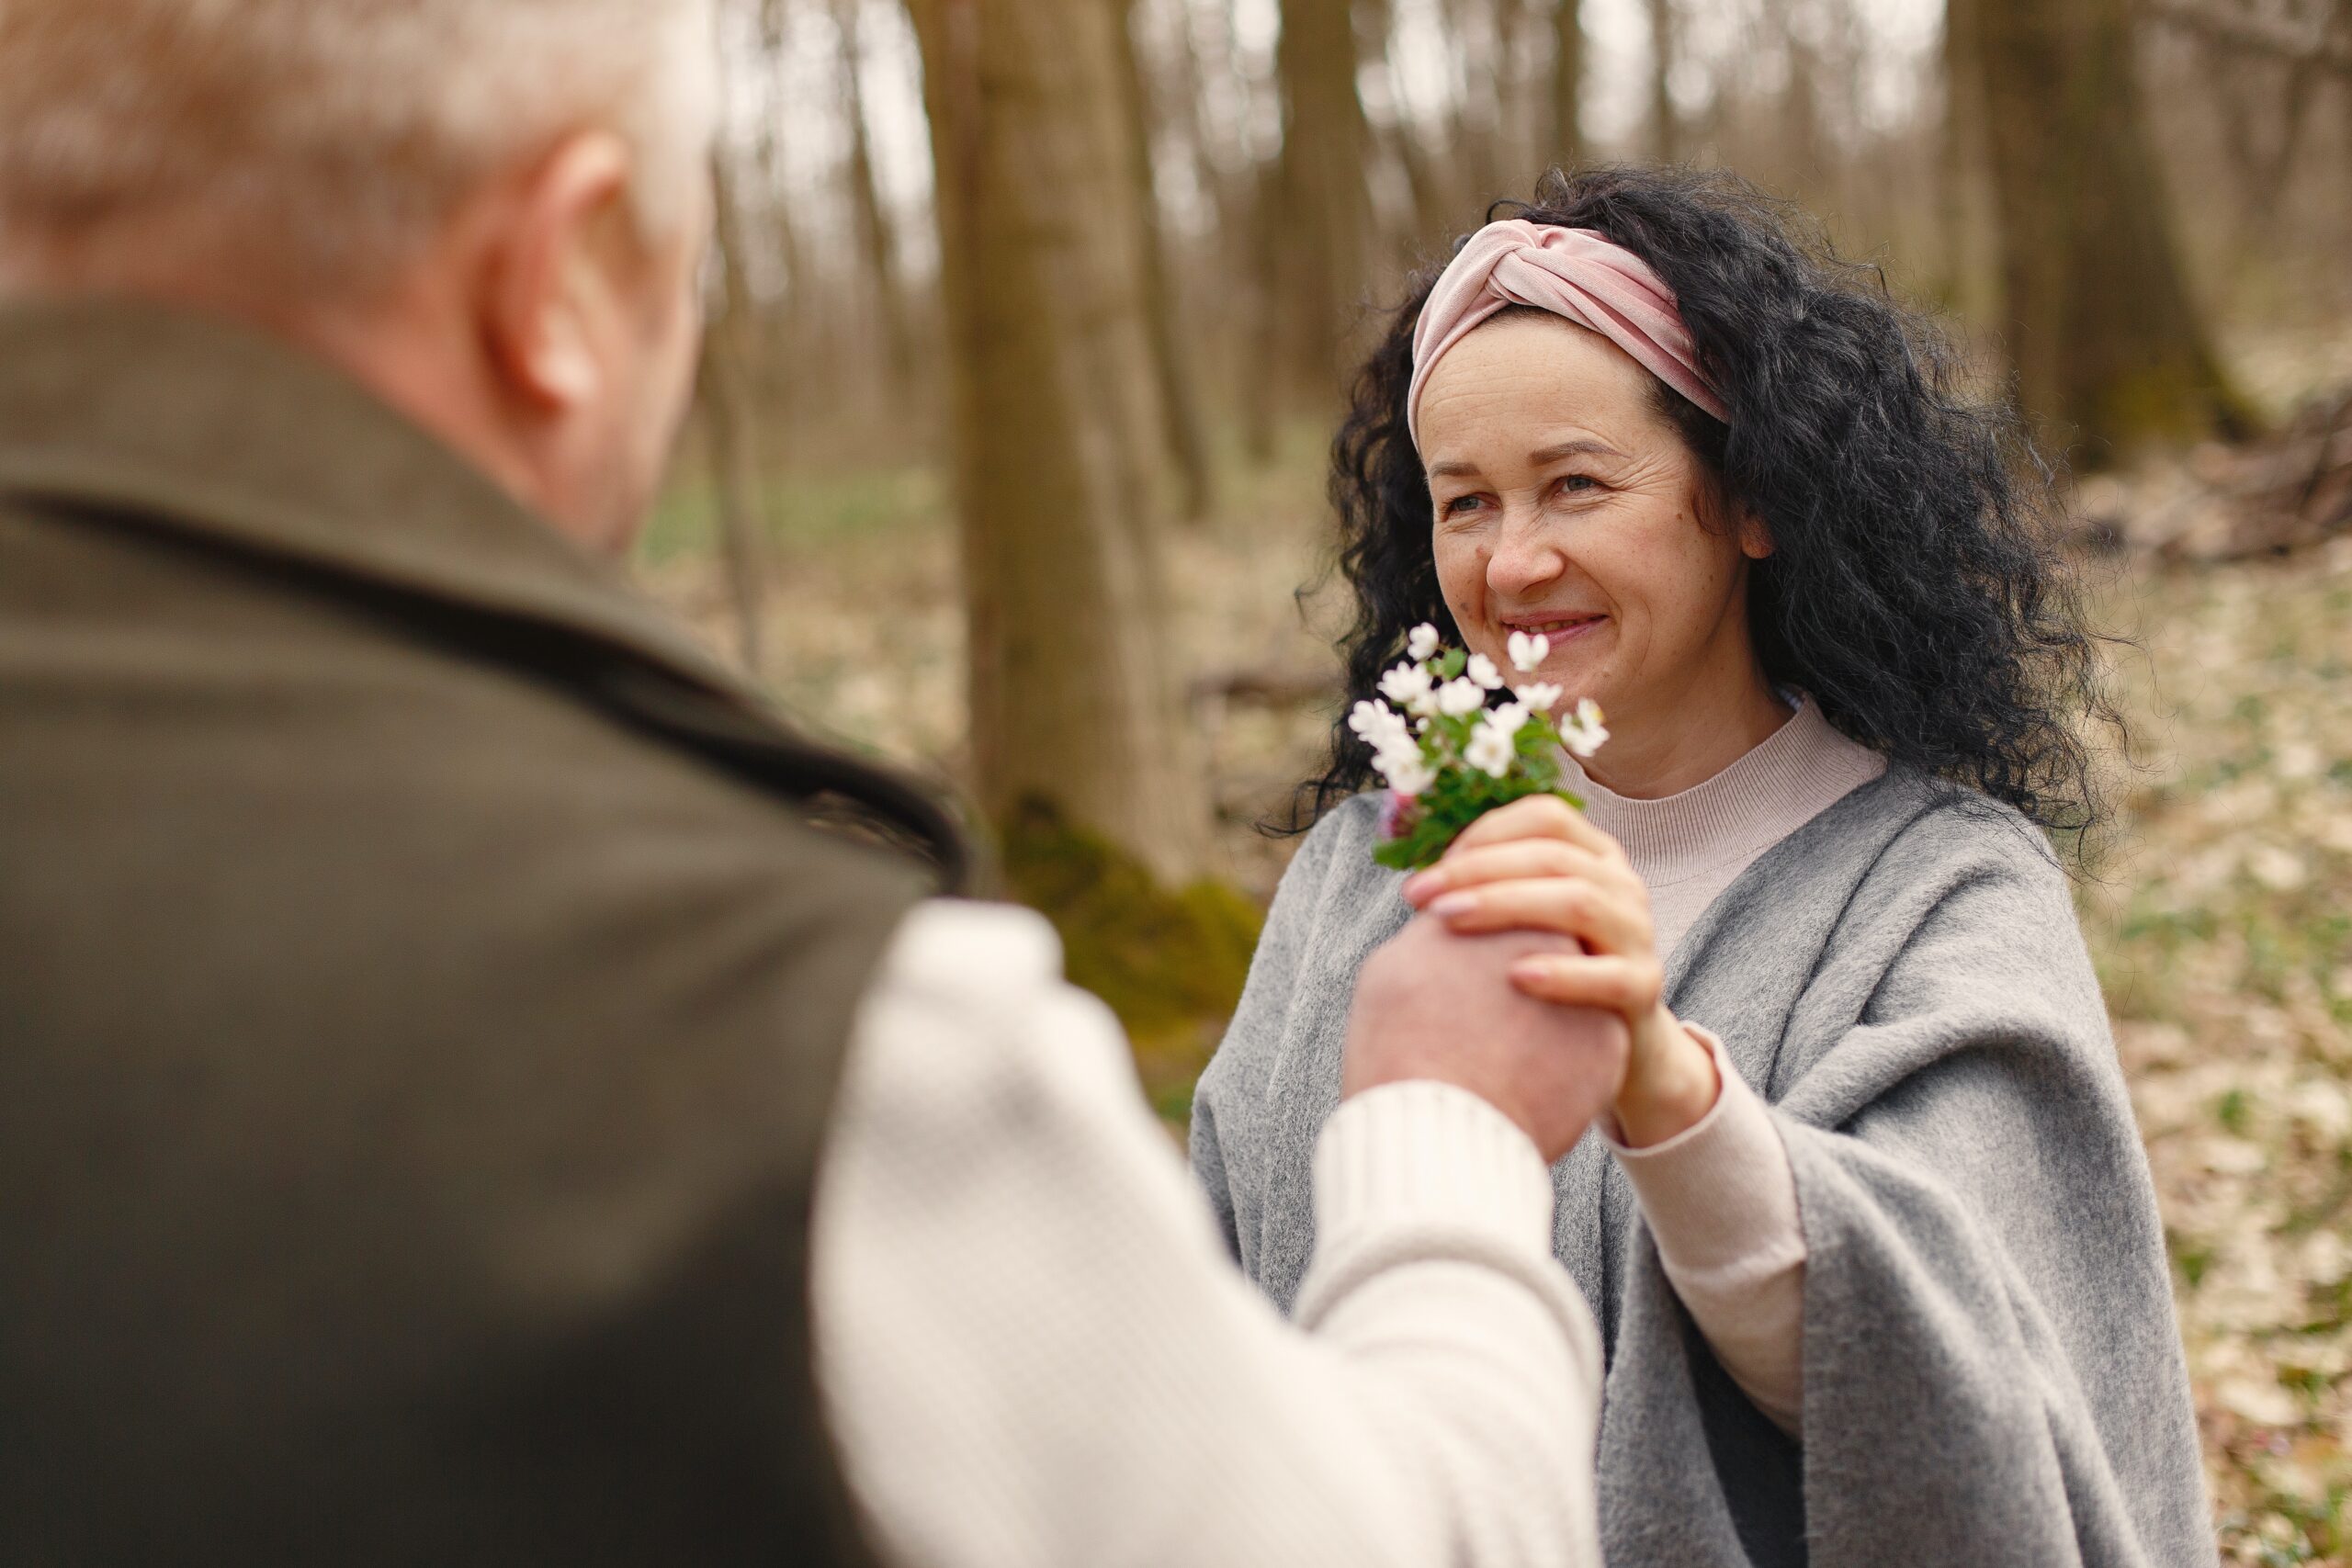 Watch the man express his love language by giving flowers